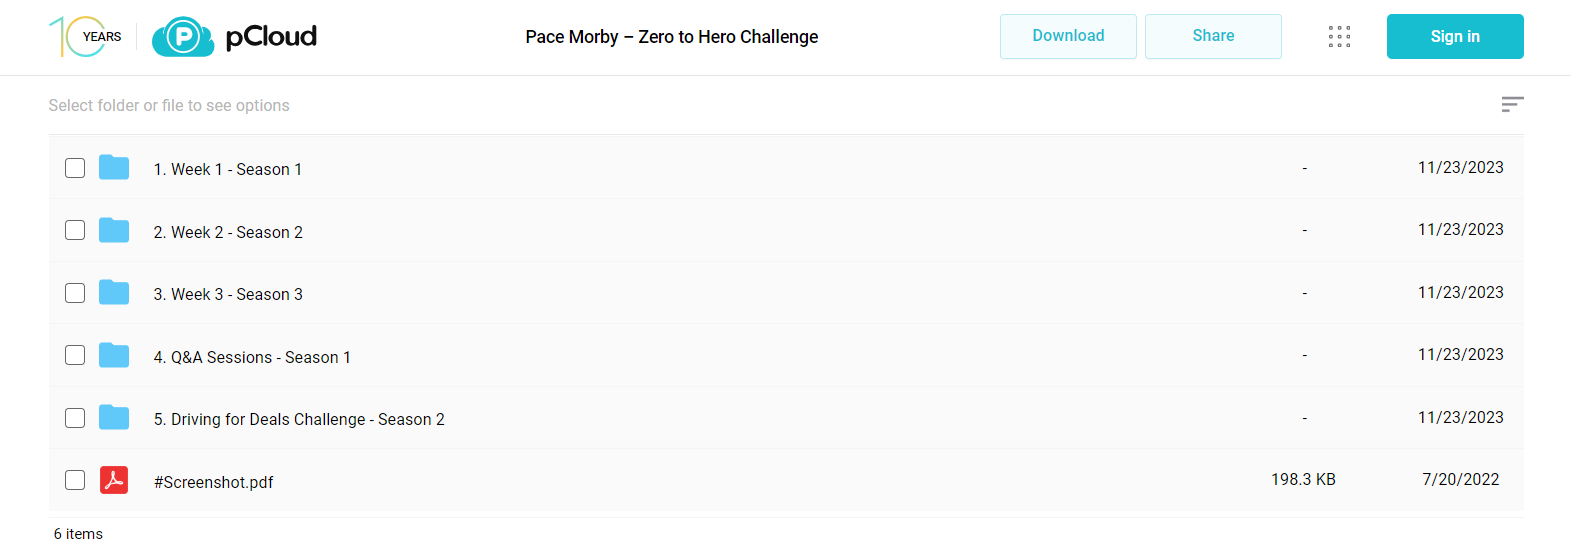 Pace Morby - Zero to Hero Challenge